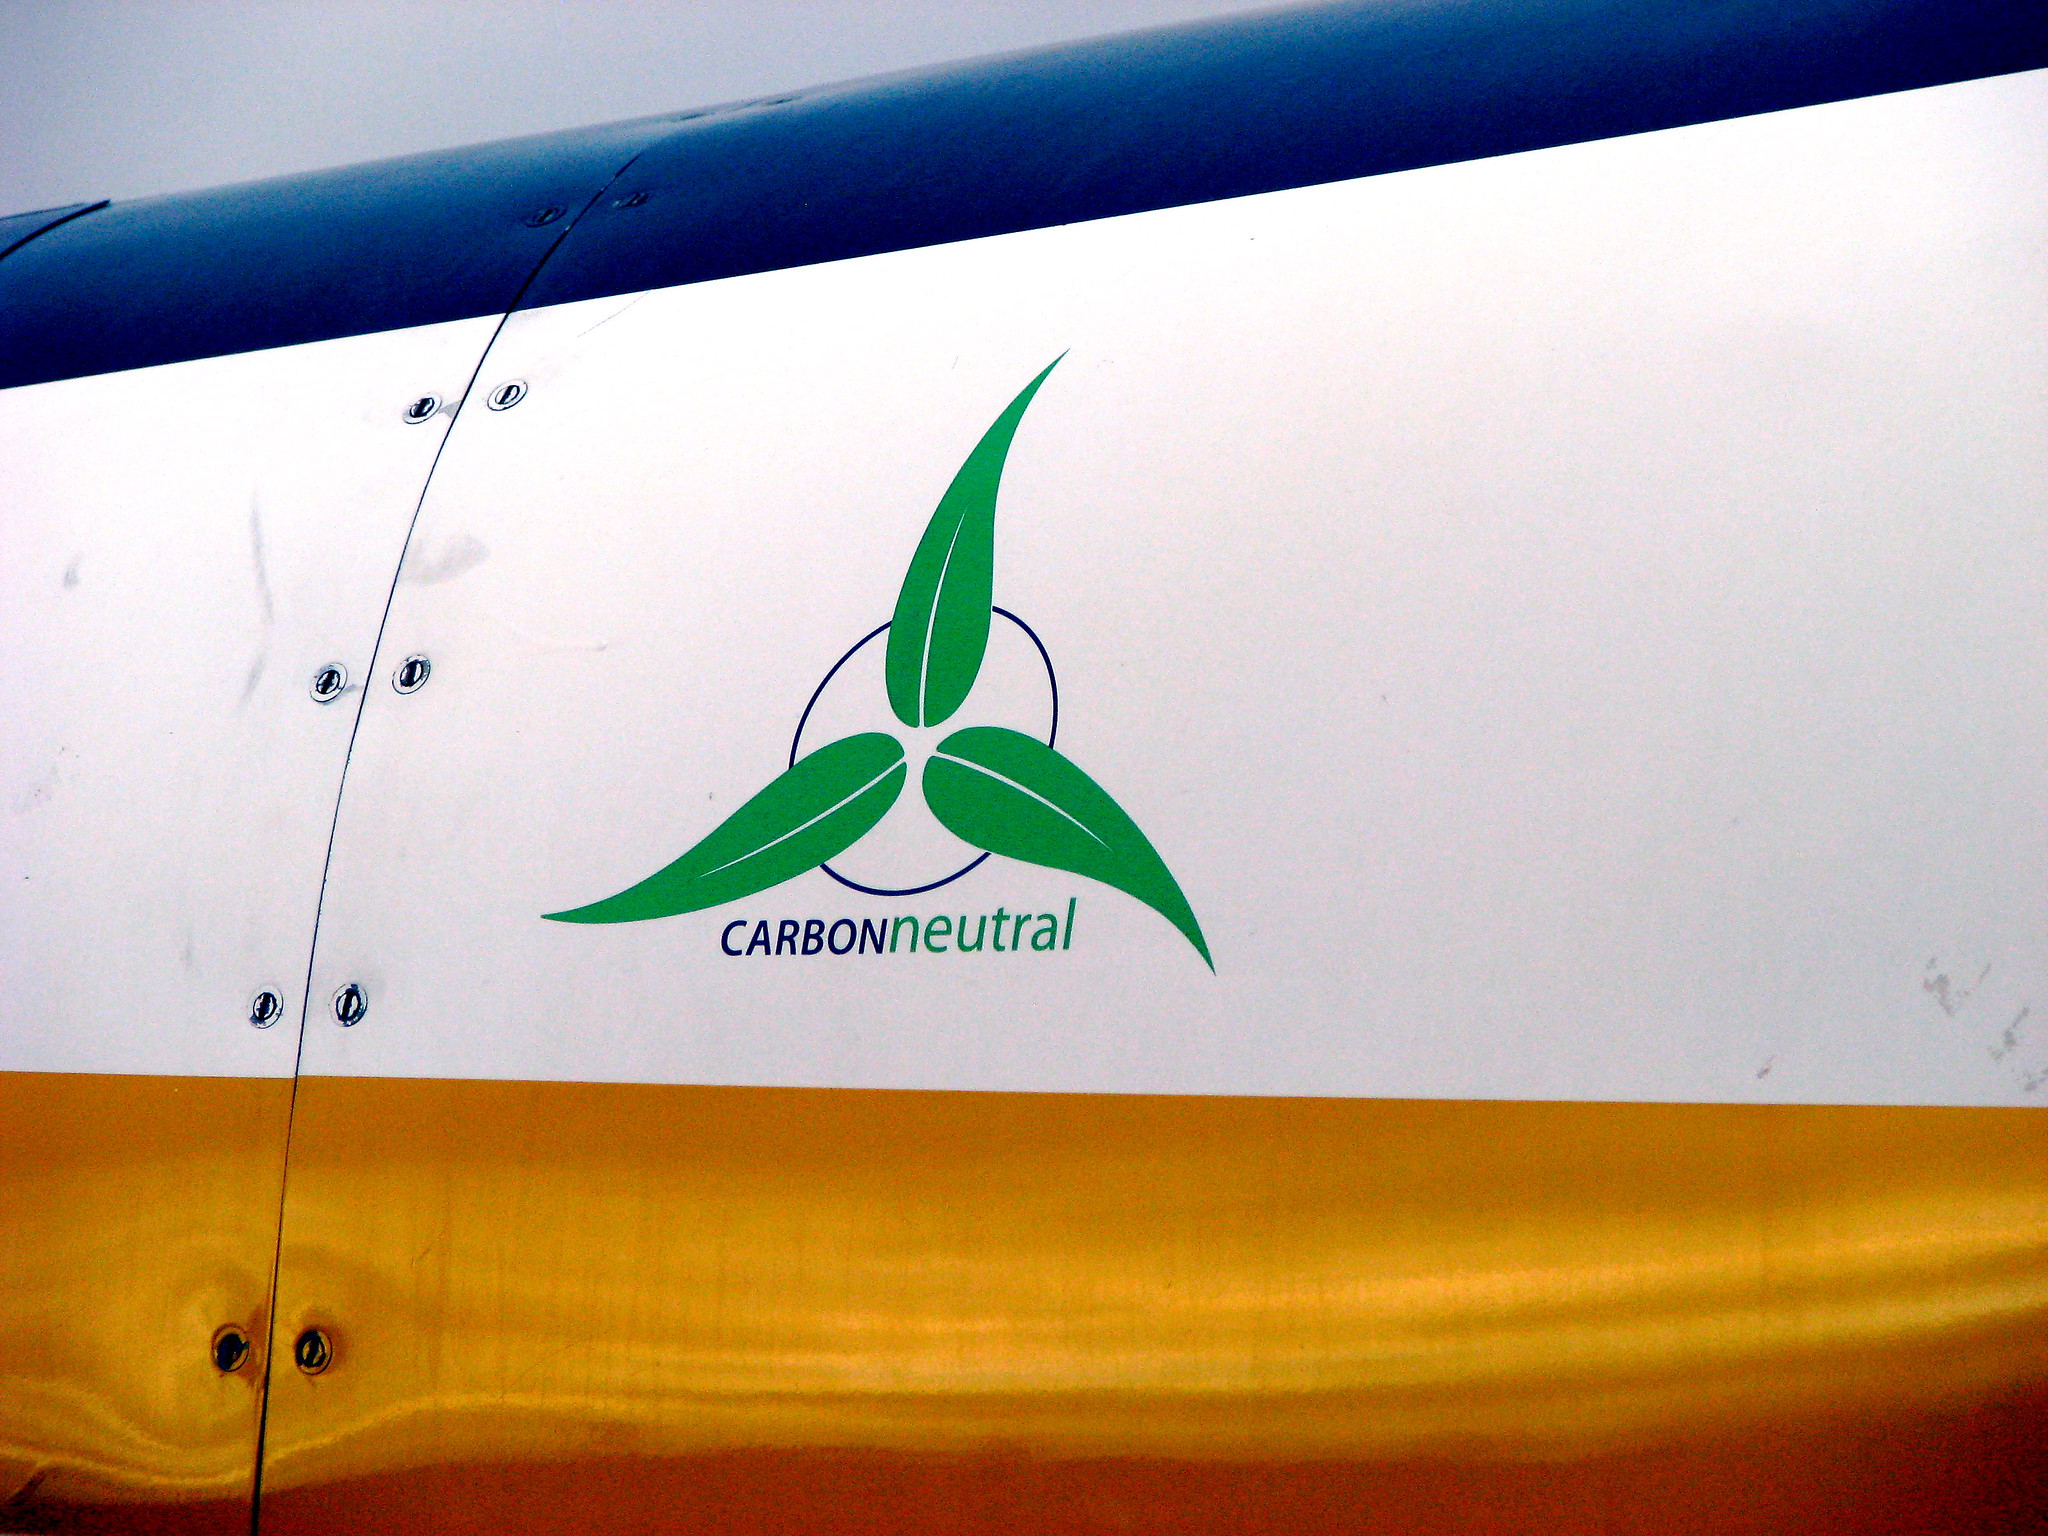 A symbol saying &quot;carbon neutral&quot; on the side of a sea plane.